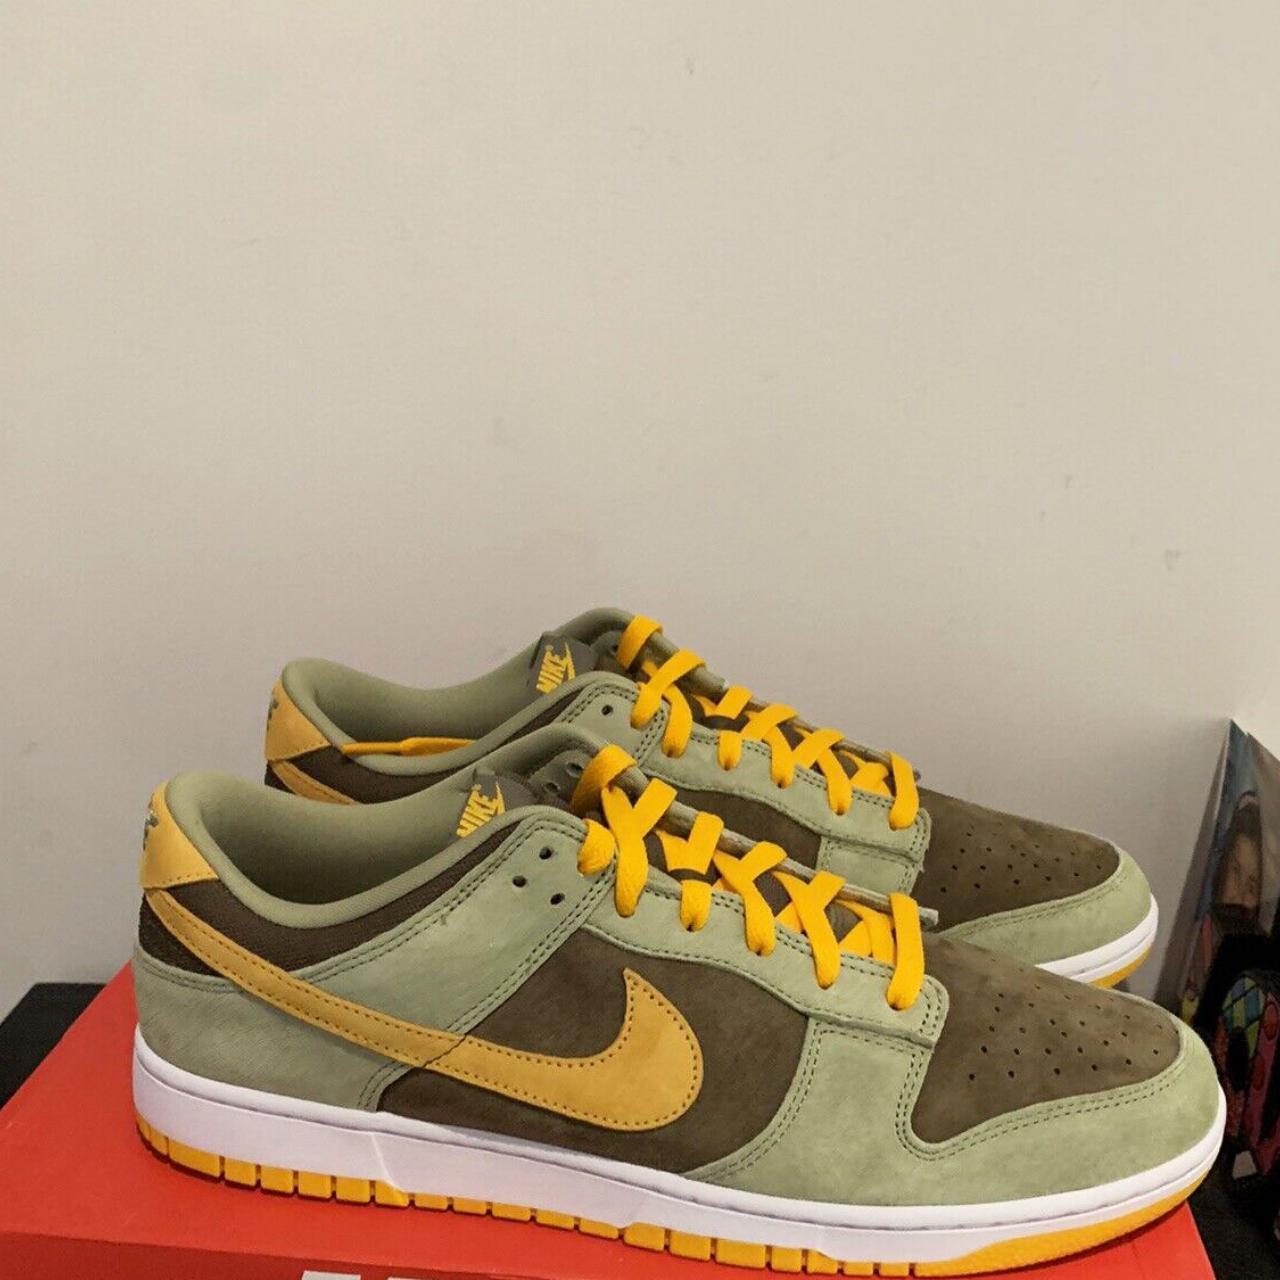 Dunk Low 'Dusty Olive' (DH5360-300) Release Date. Nike SNKRS